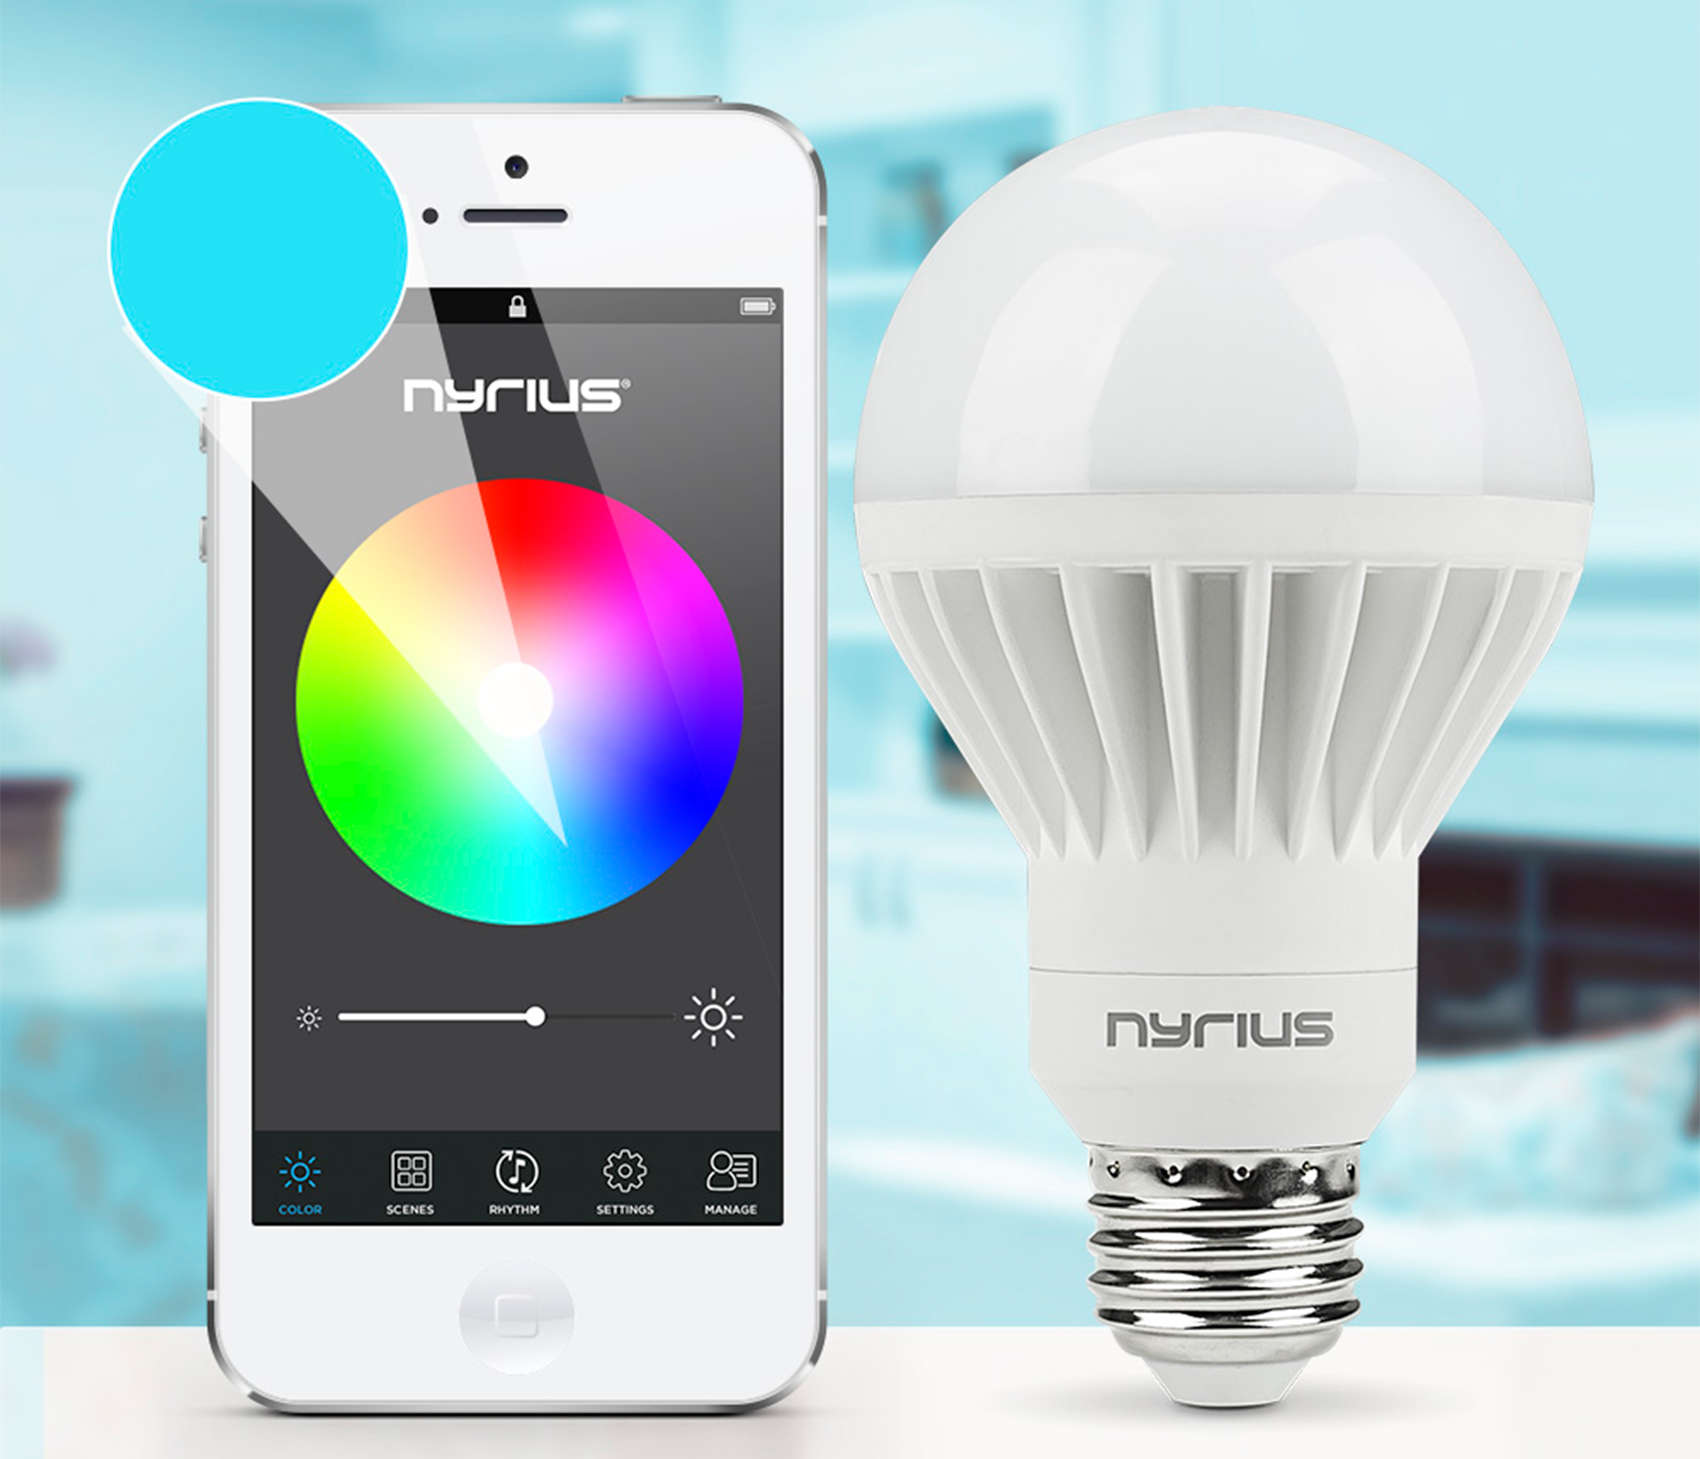 You can control the Nyrius smart bulb with your smartphone.